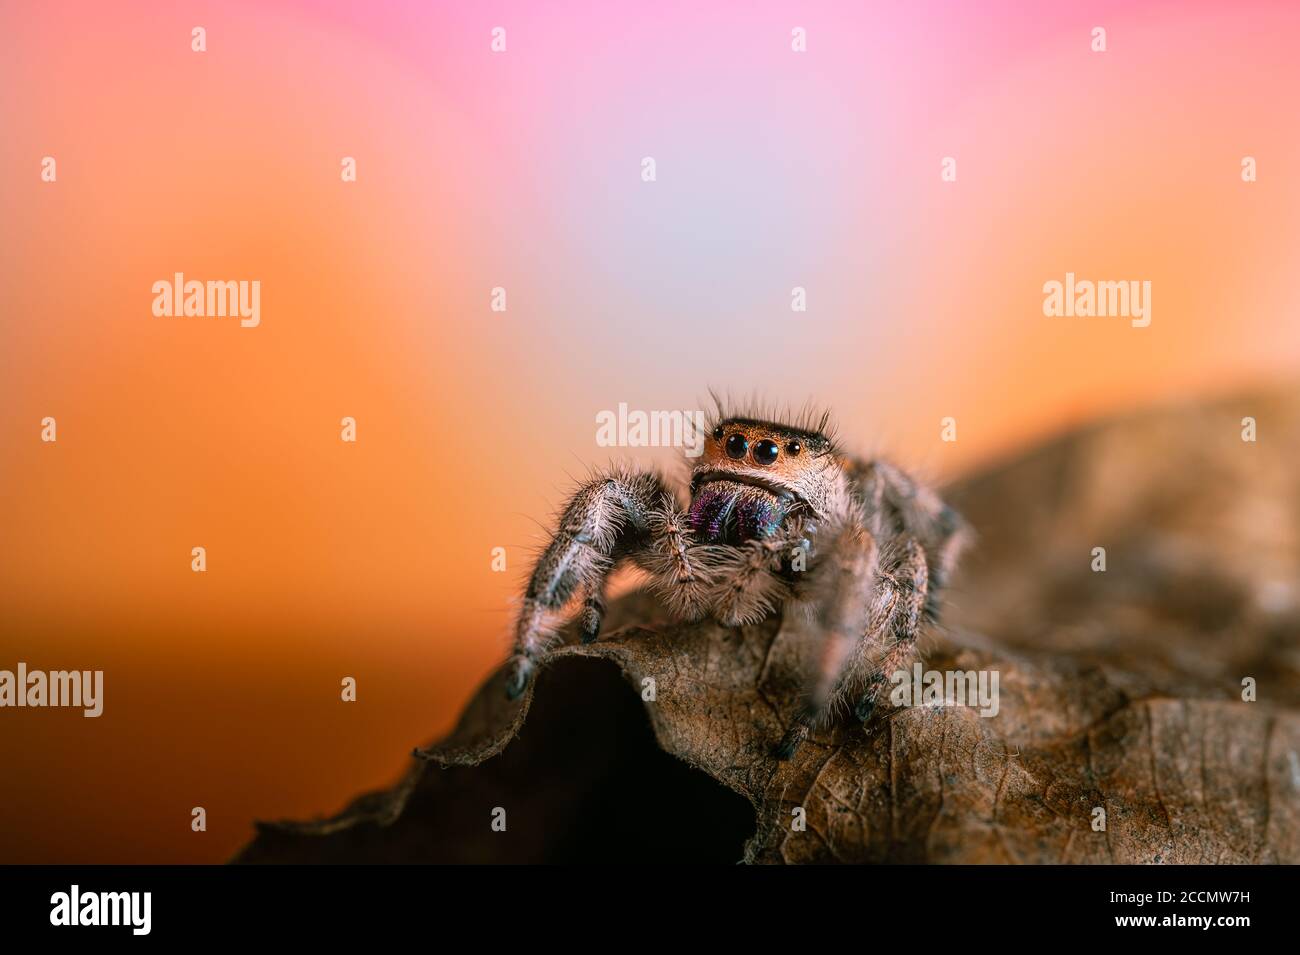 A female jumping spider (Phidippus regius) crawling on a dry leaf. Autumn warm colors, macro, sharp details. Beautiful huge eyes are looking at the ca Stock Photo